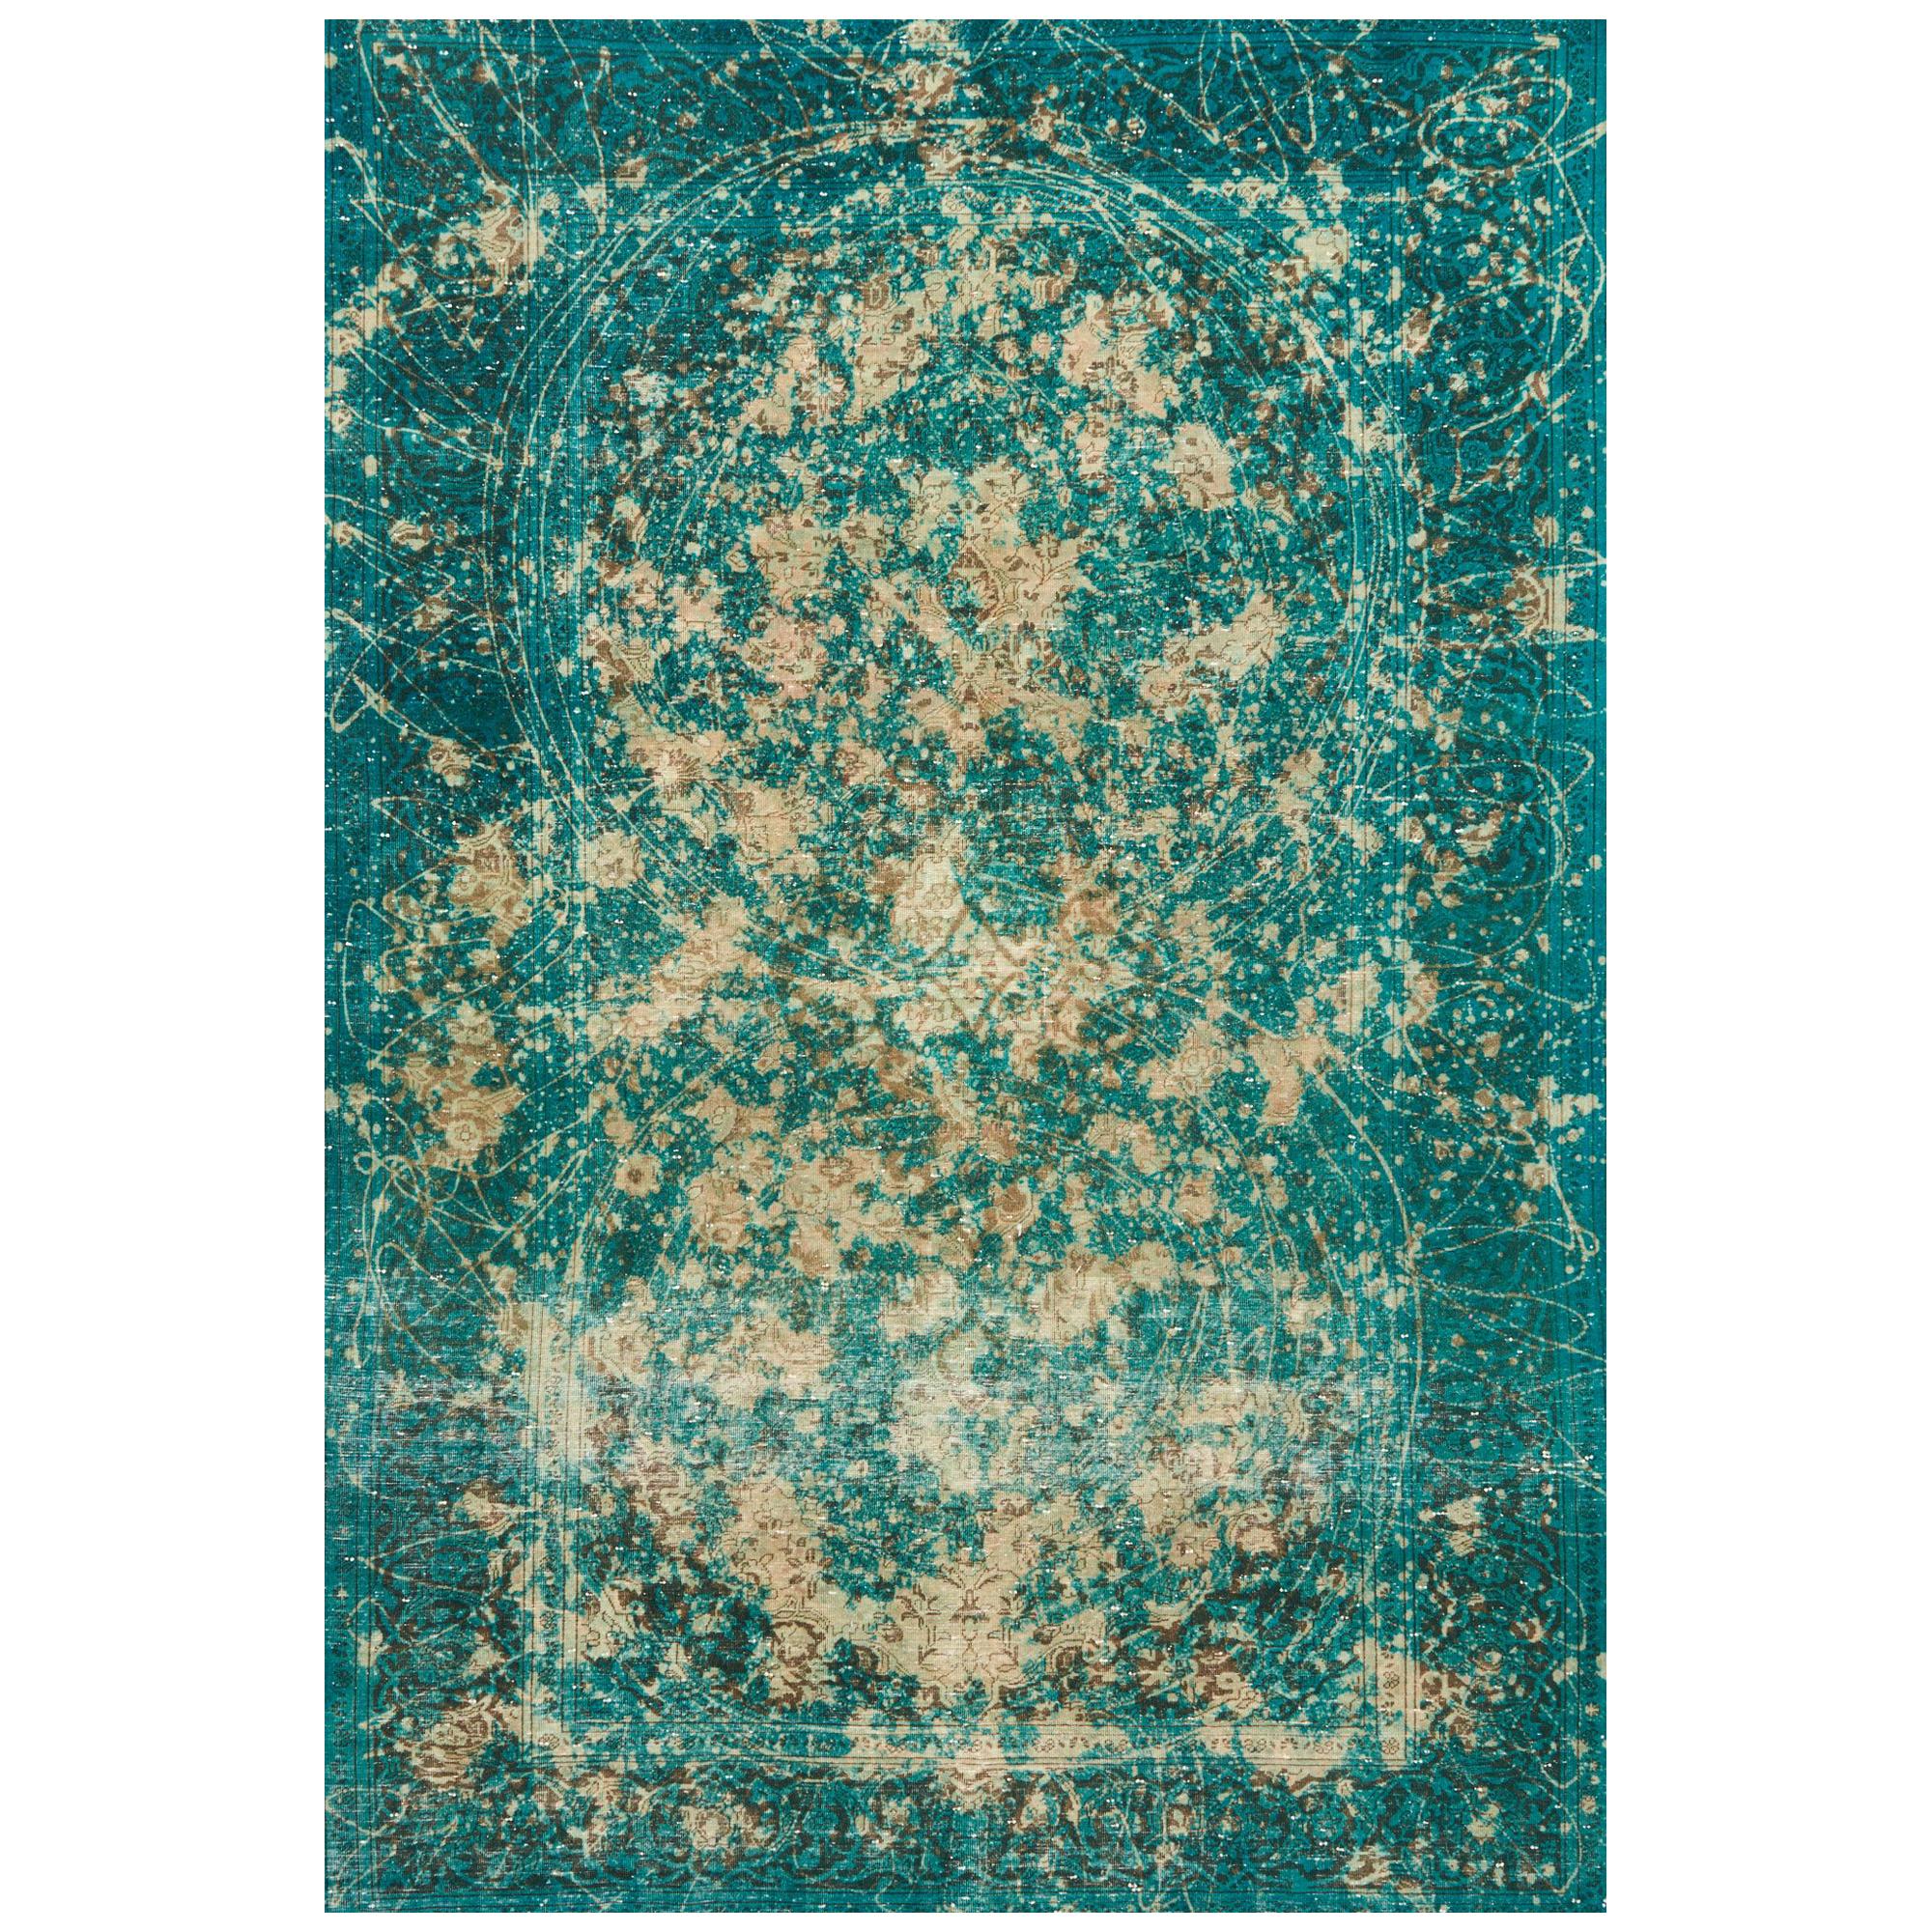 Schumacher Trifid Jade Area Rug in Hand Knotted Wool by Patterson Flynn Martin